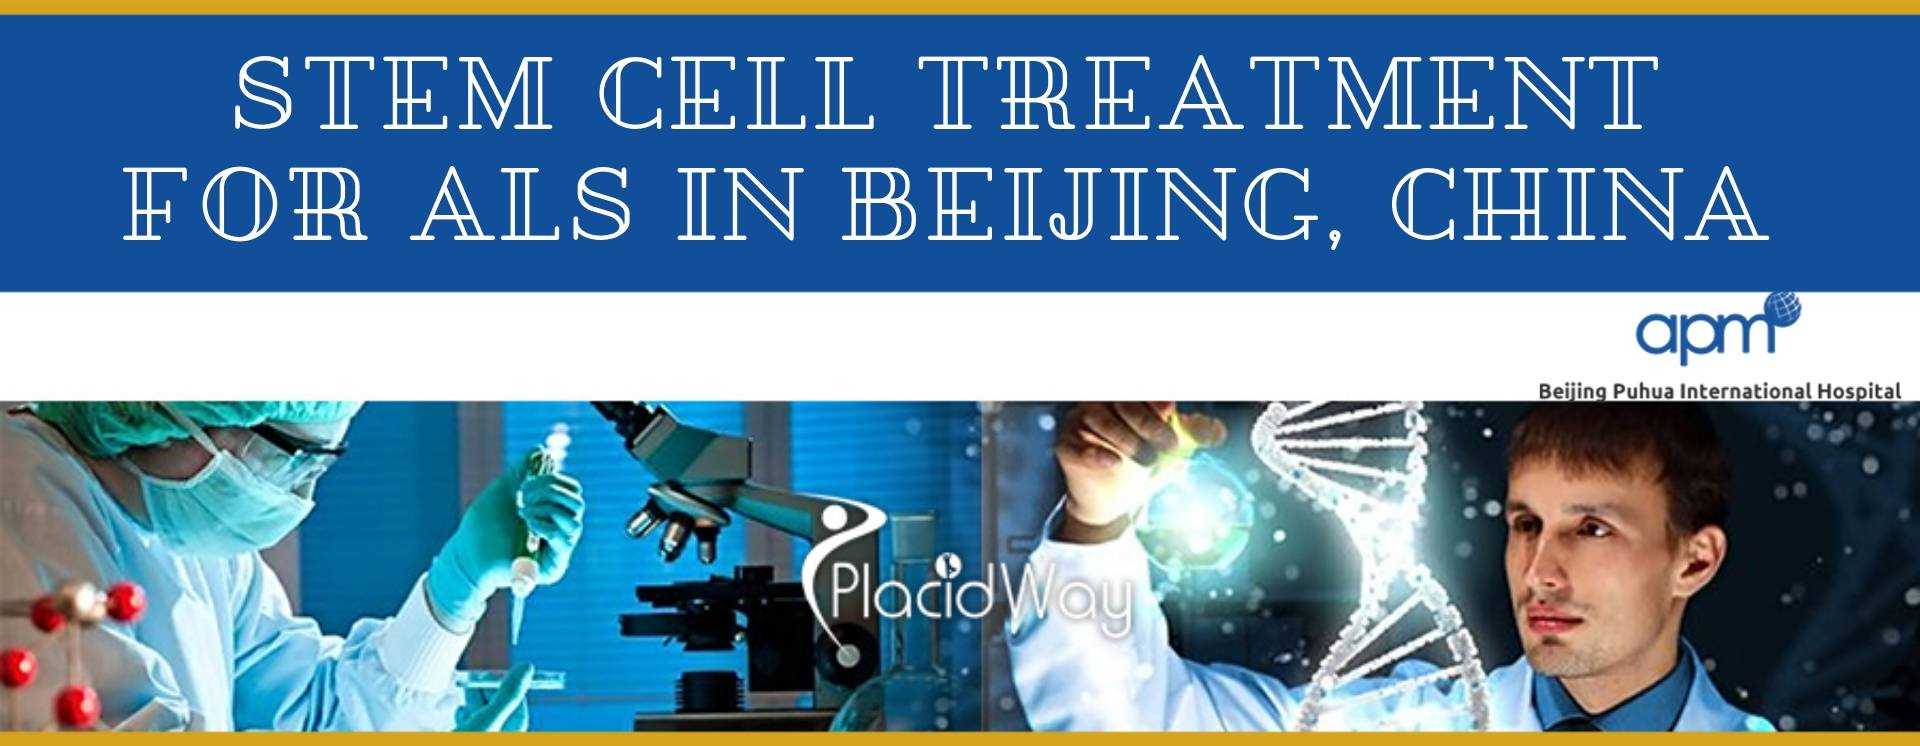 Stem Cell Treatment for ALS in Beijing, China